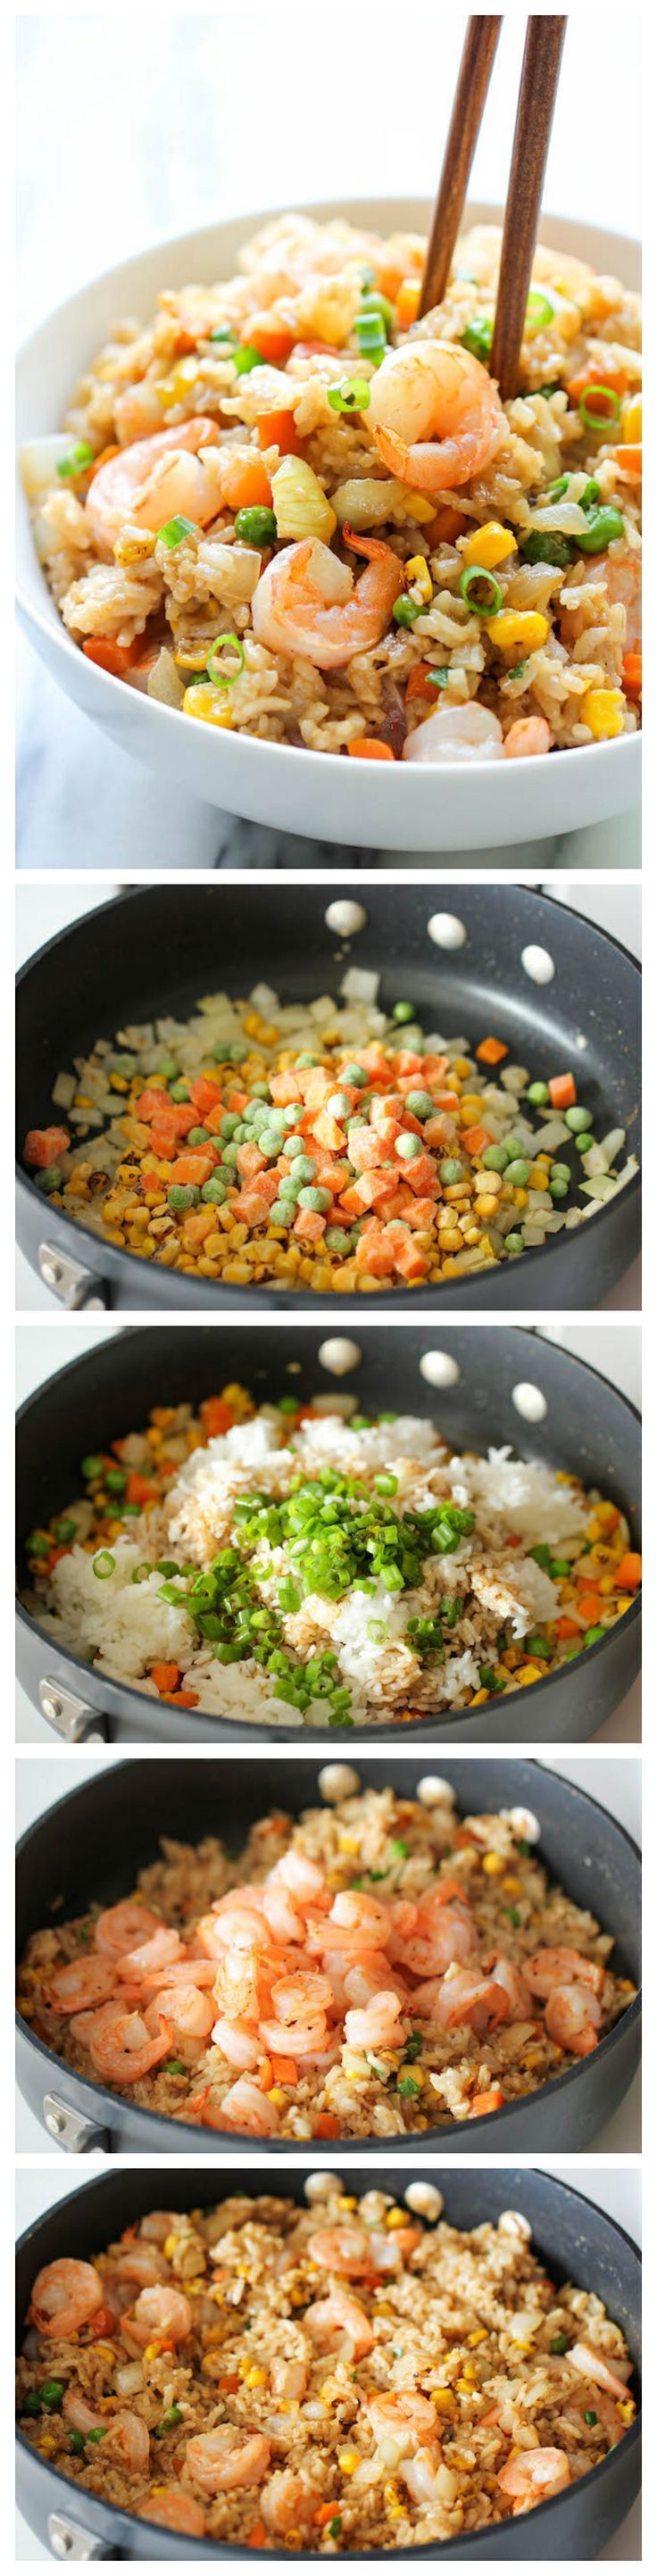 Shrimp Fried Rice – Why order take-out?   This homemade version is so much healthier, cheaper and tastes a million times